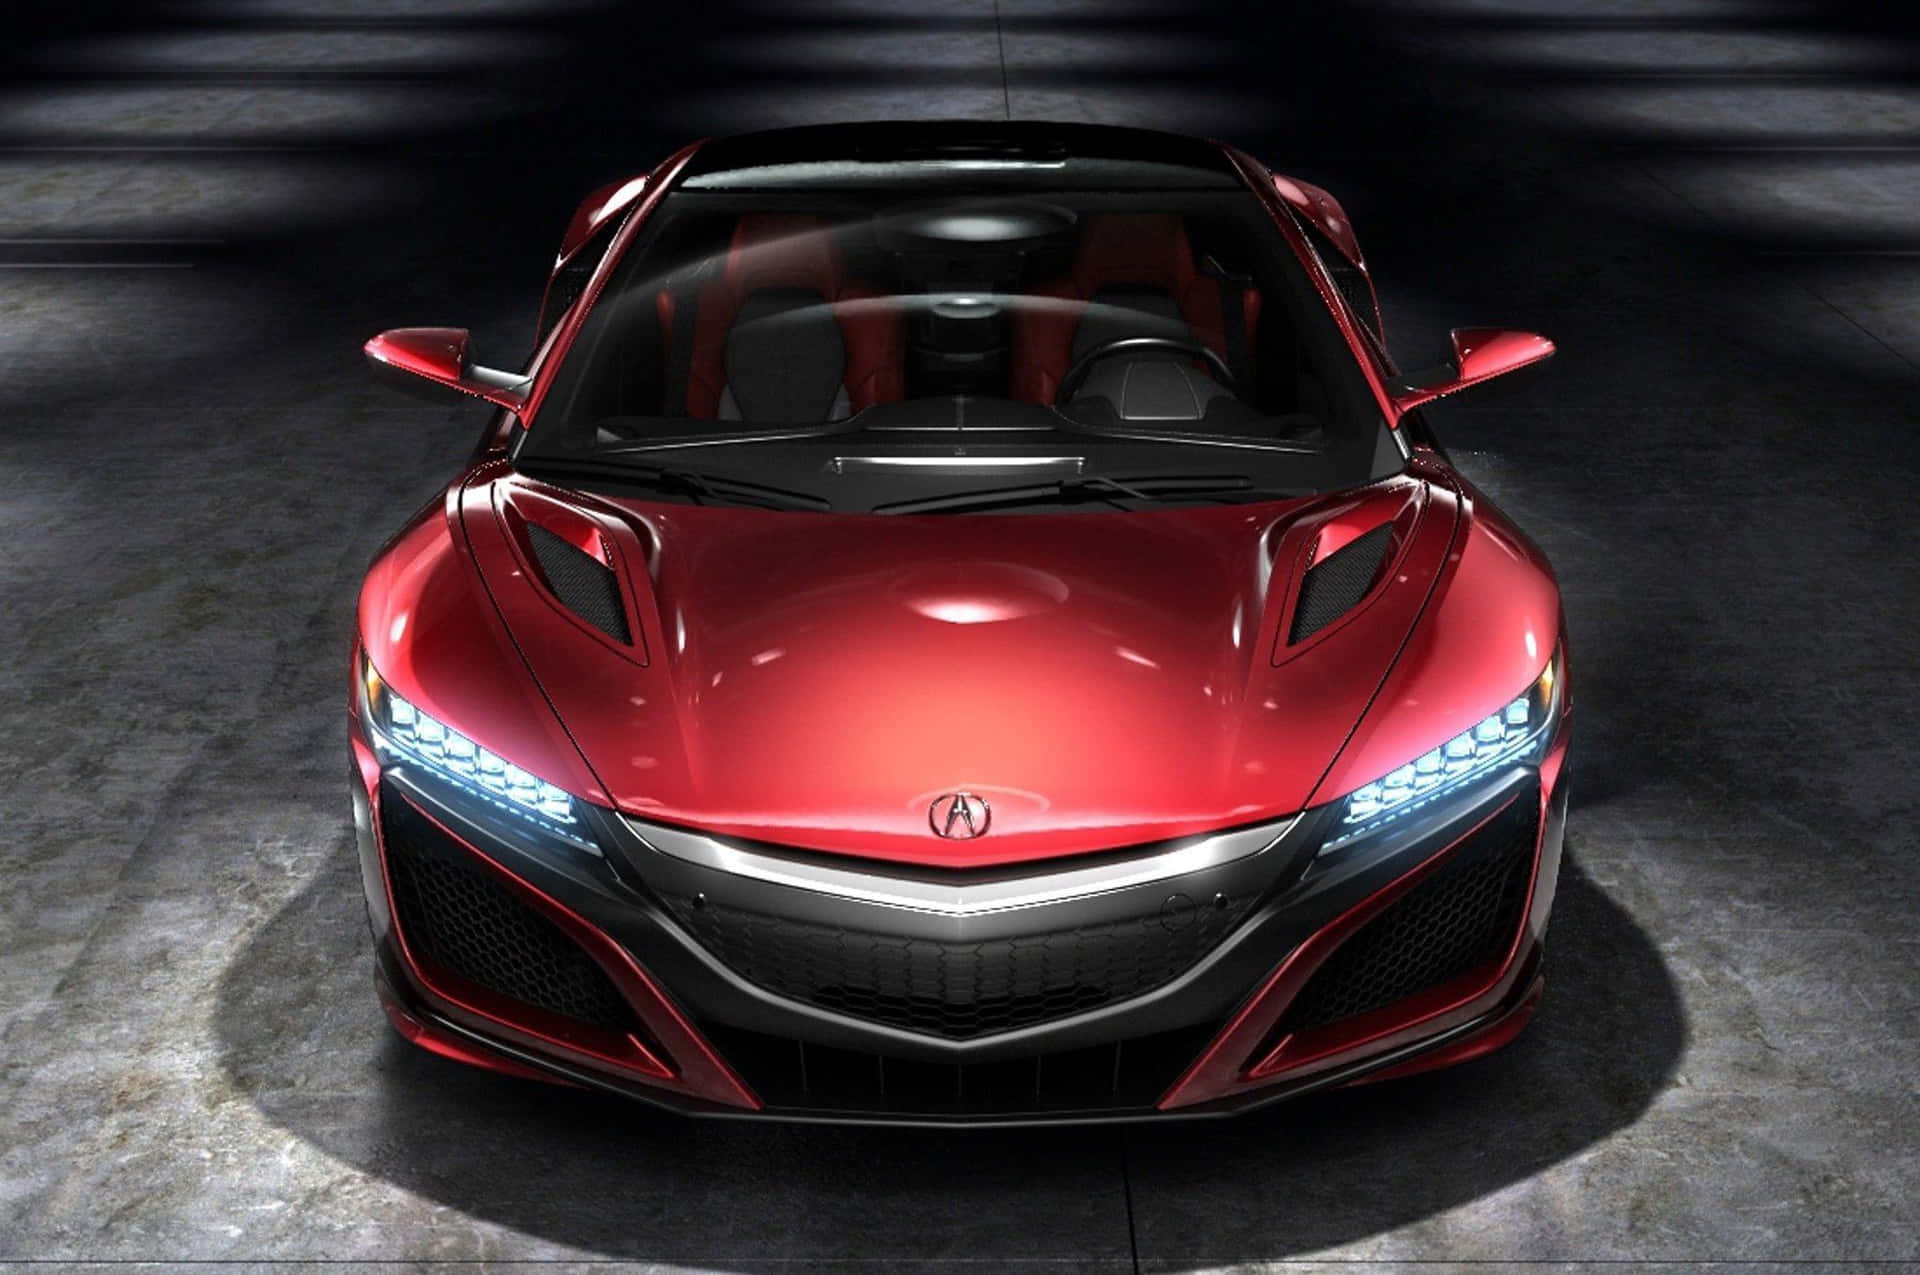 Acura NSX in Action Wallpaper